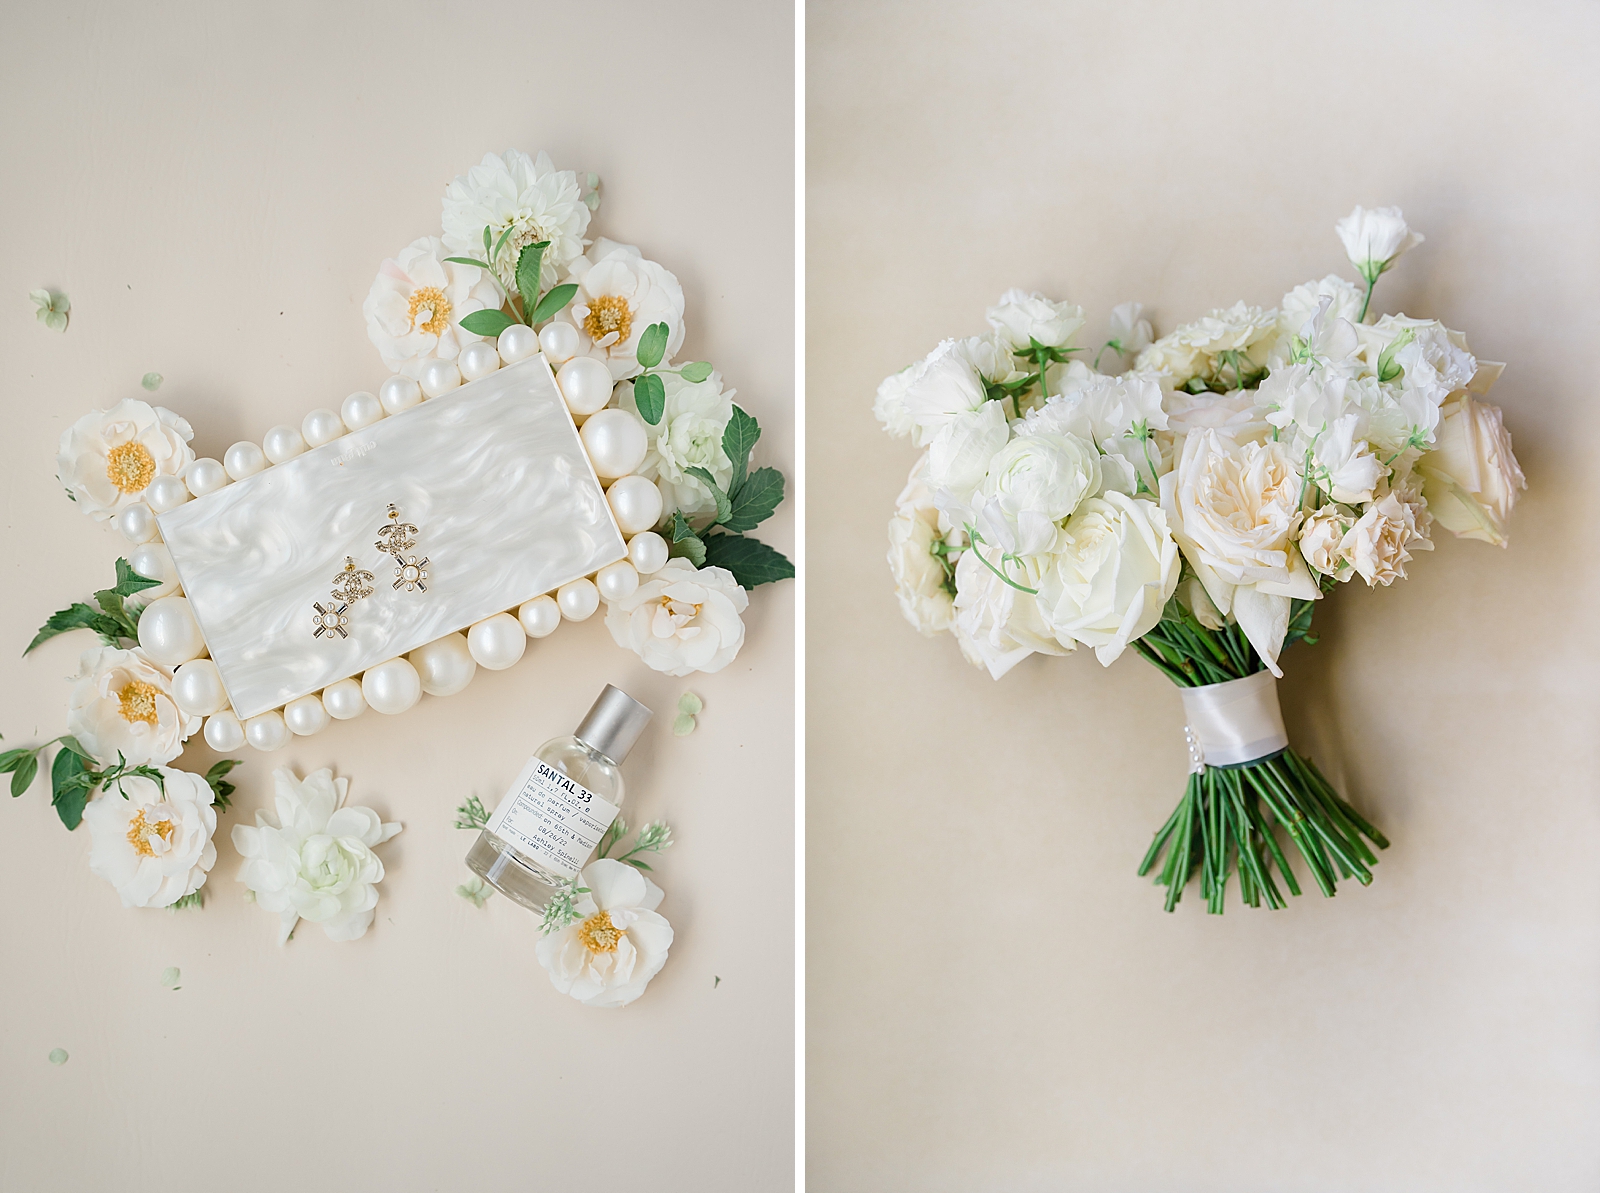 Left photo: Shot of cufflinks surrounded by wedding flowers.
Right photo: Shot of the Bride's bouquet. 